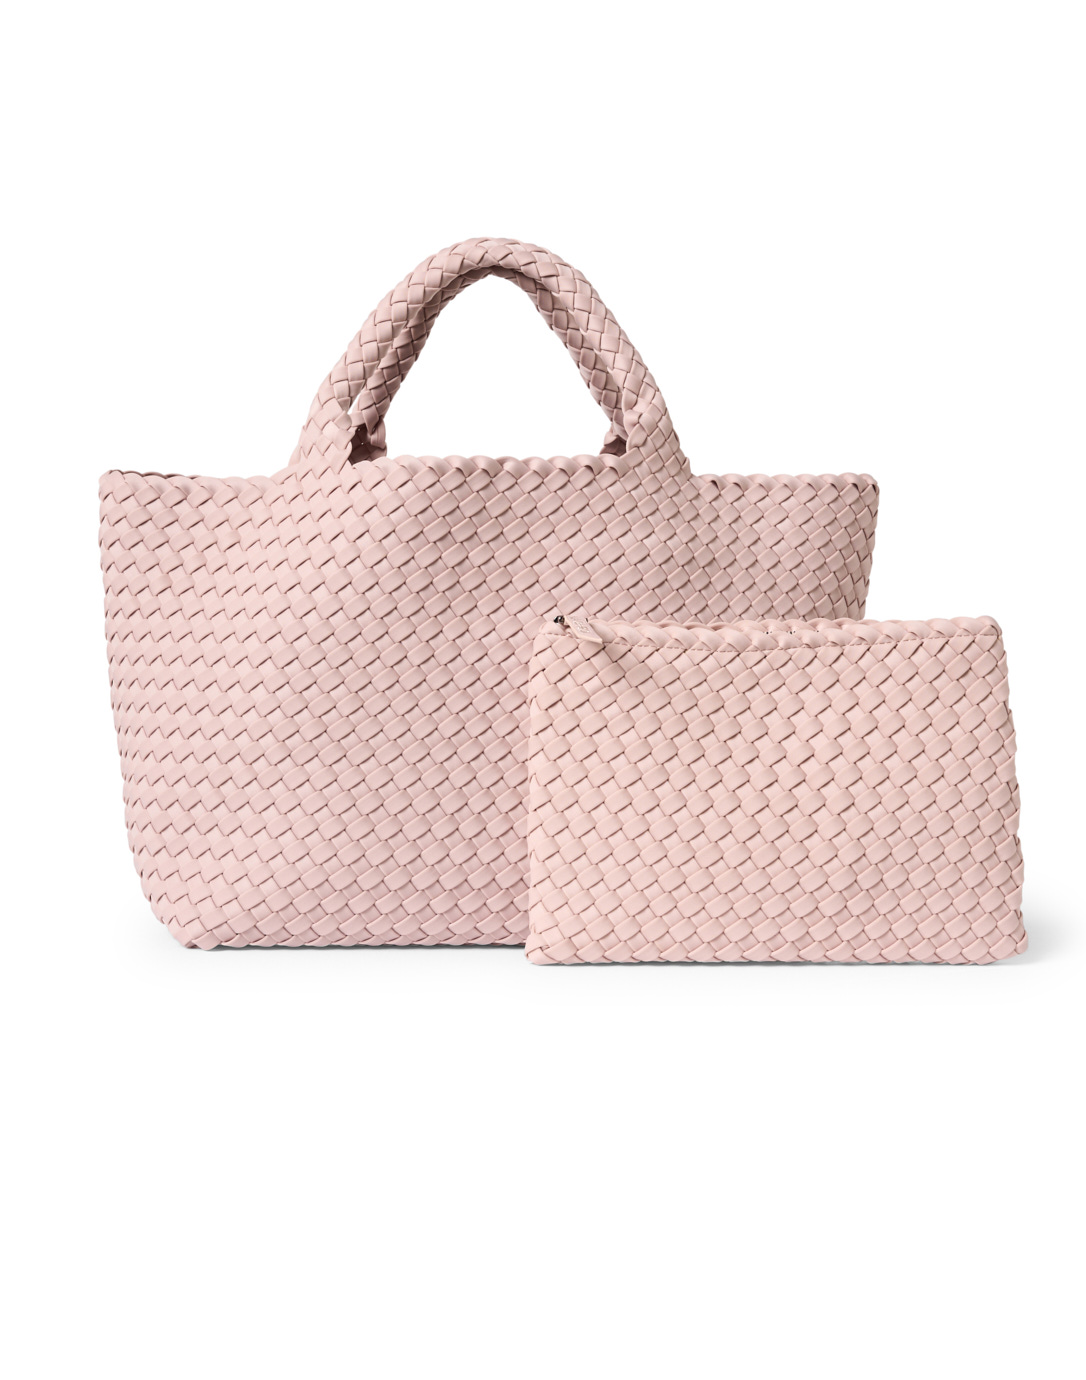 Things I'm loving lately: my NAGHEDI St Barths large tote in shell pin, tote